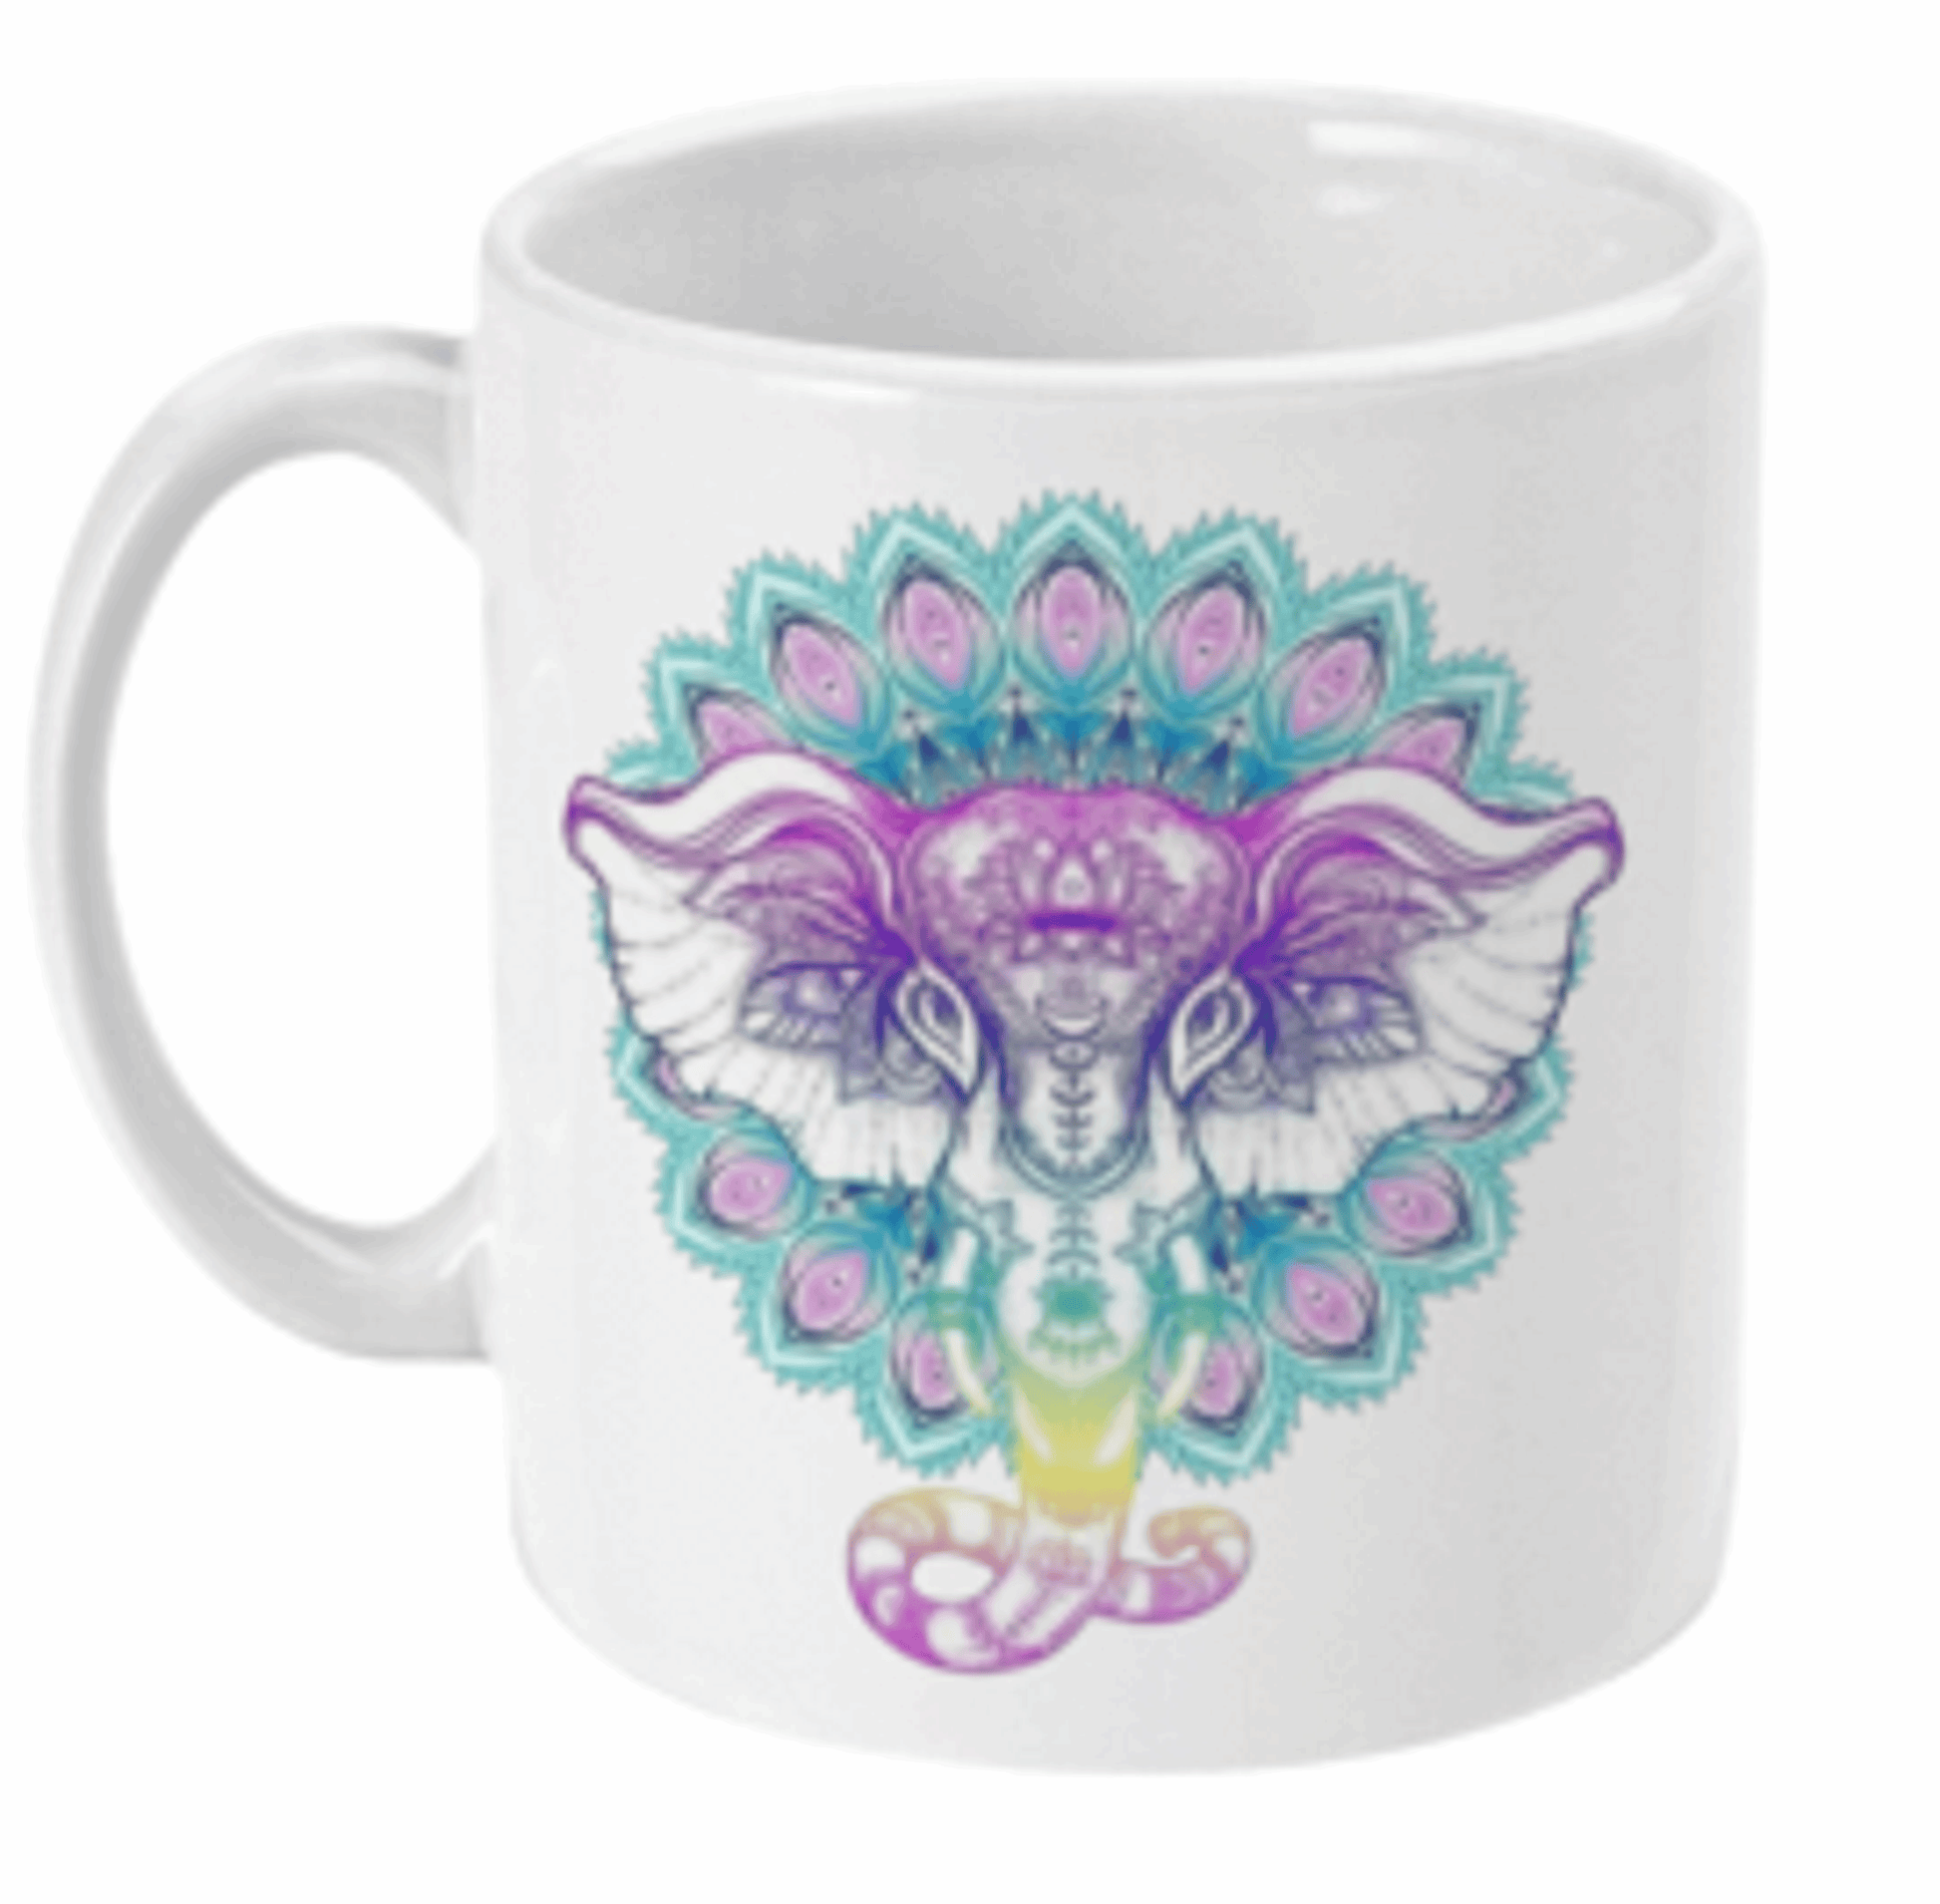  Beautiful Water Colour Elephant Coffee Mug by Free Spirit Accessories sold by Free Spirit Accessories